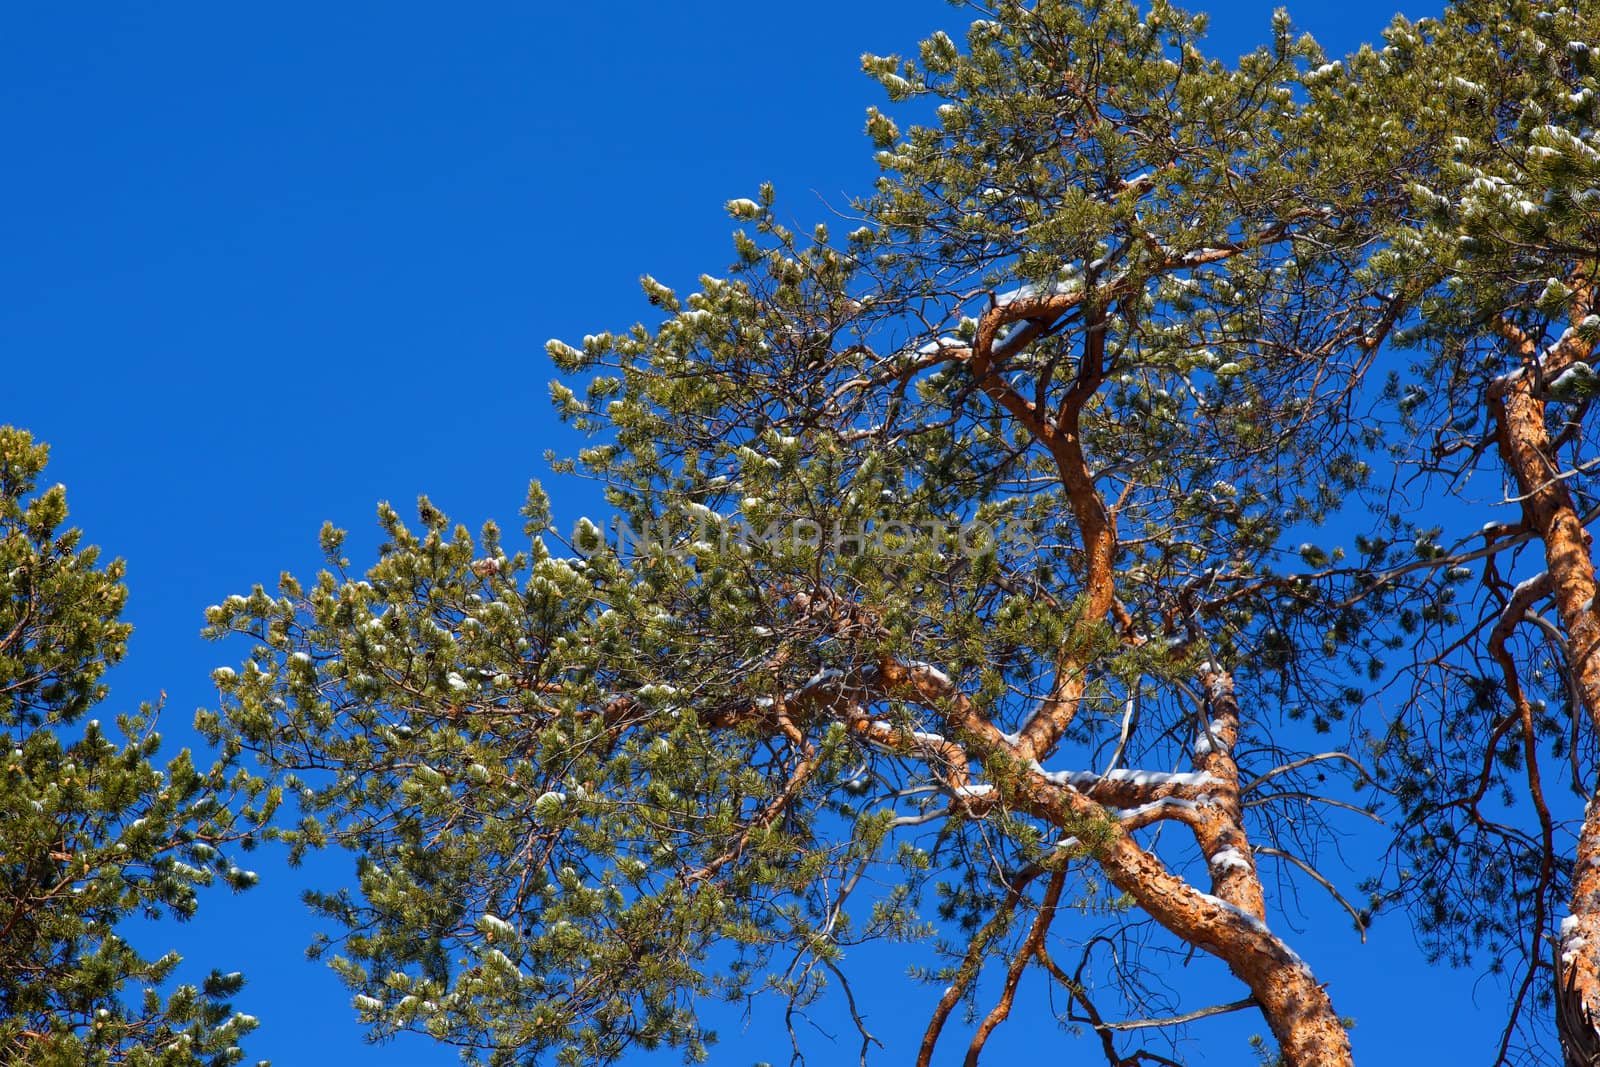 Crohn pine on a background of blue sky. Spring comes.